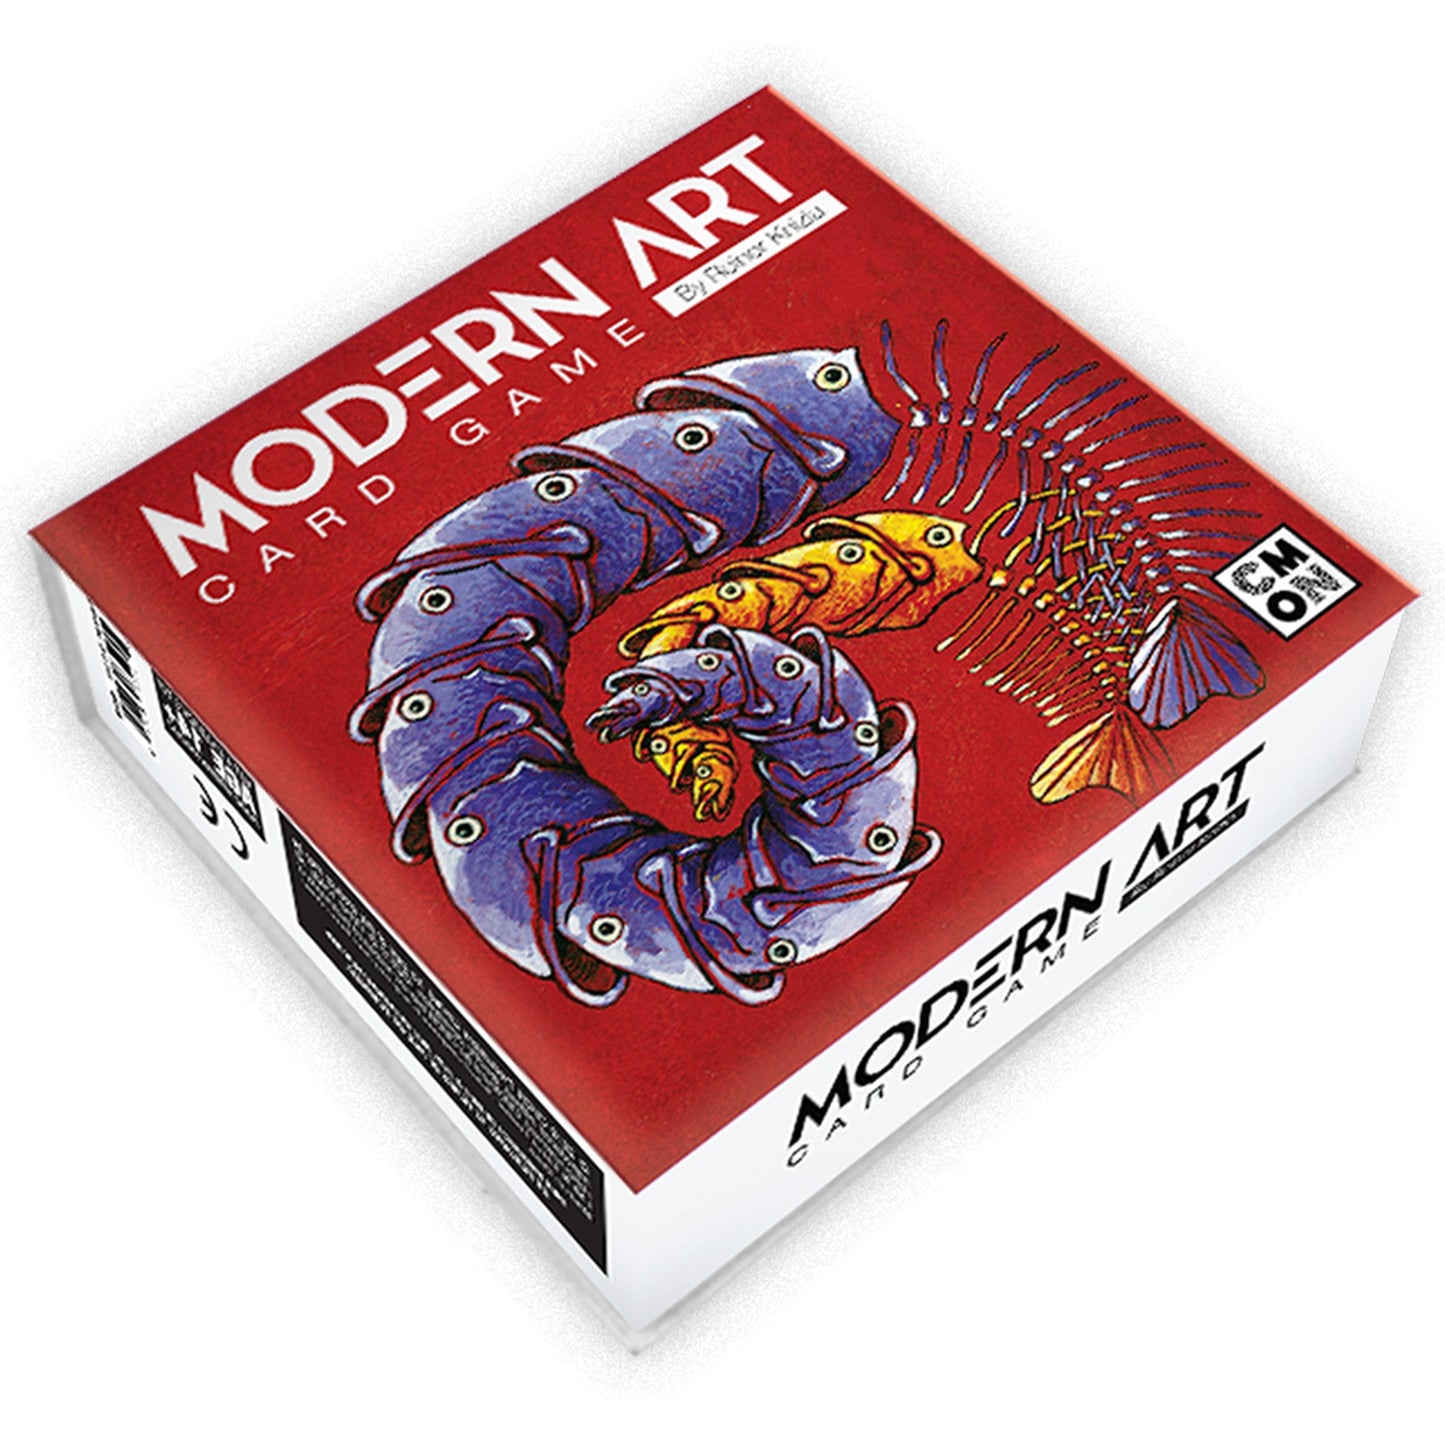 (BSG Certified USED) Modern Art: The Card Game